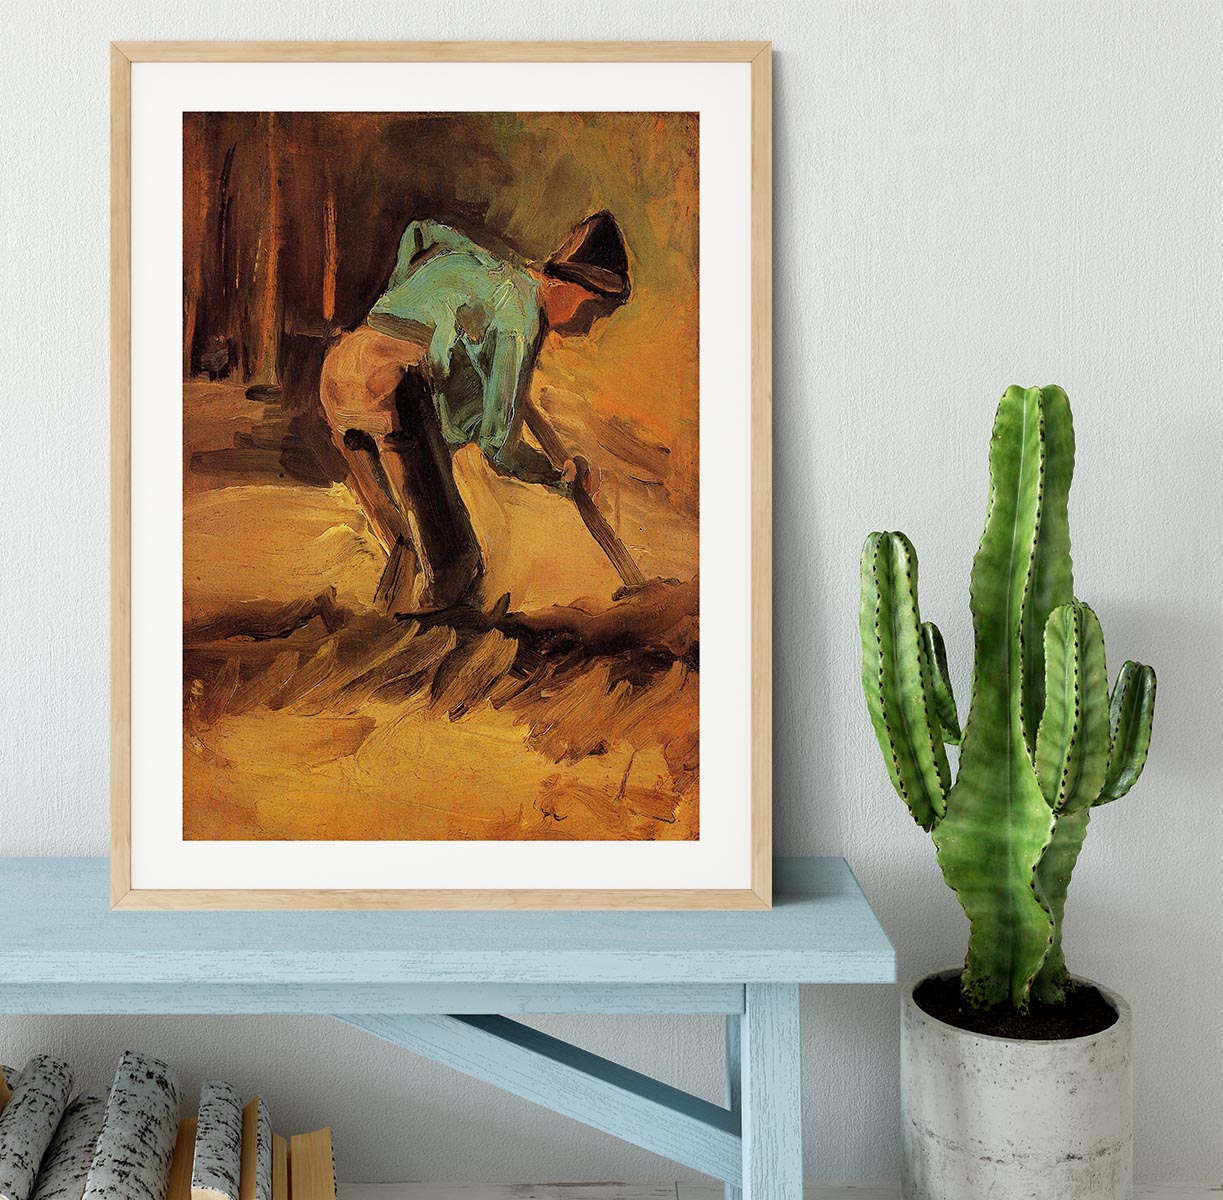 Man Stooping with Stick or Spade by Van Gogh Framed Print - Canvas Art Rocks - 3